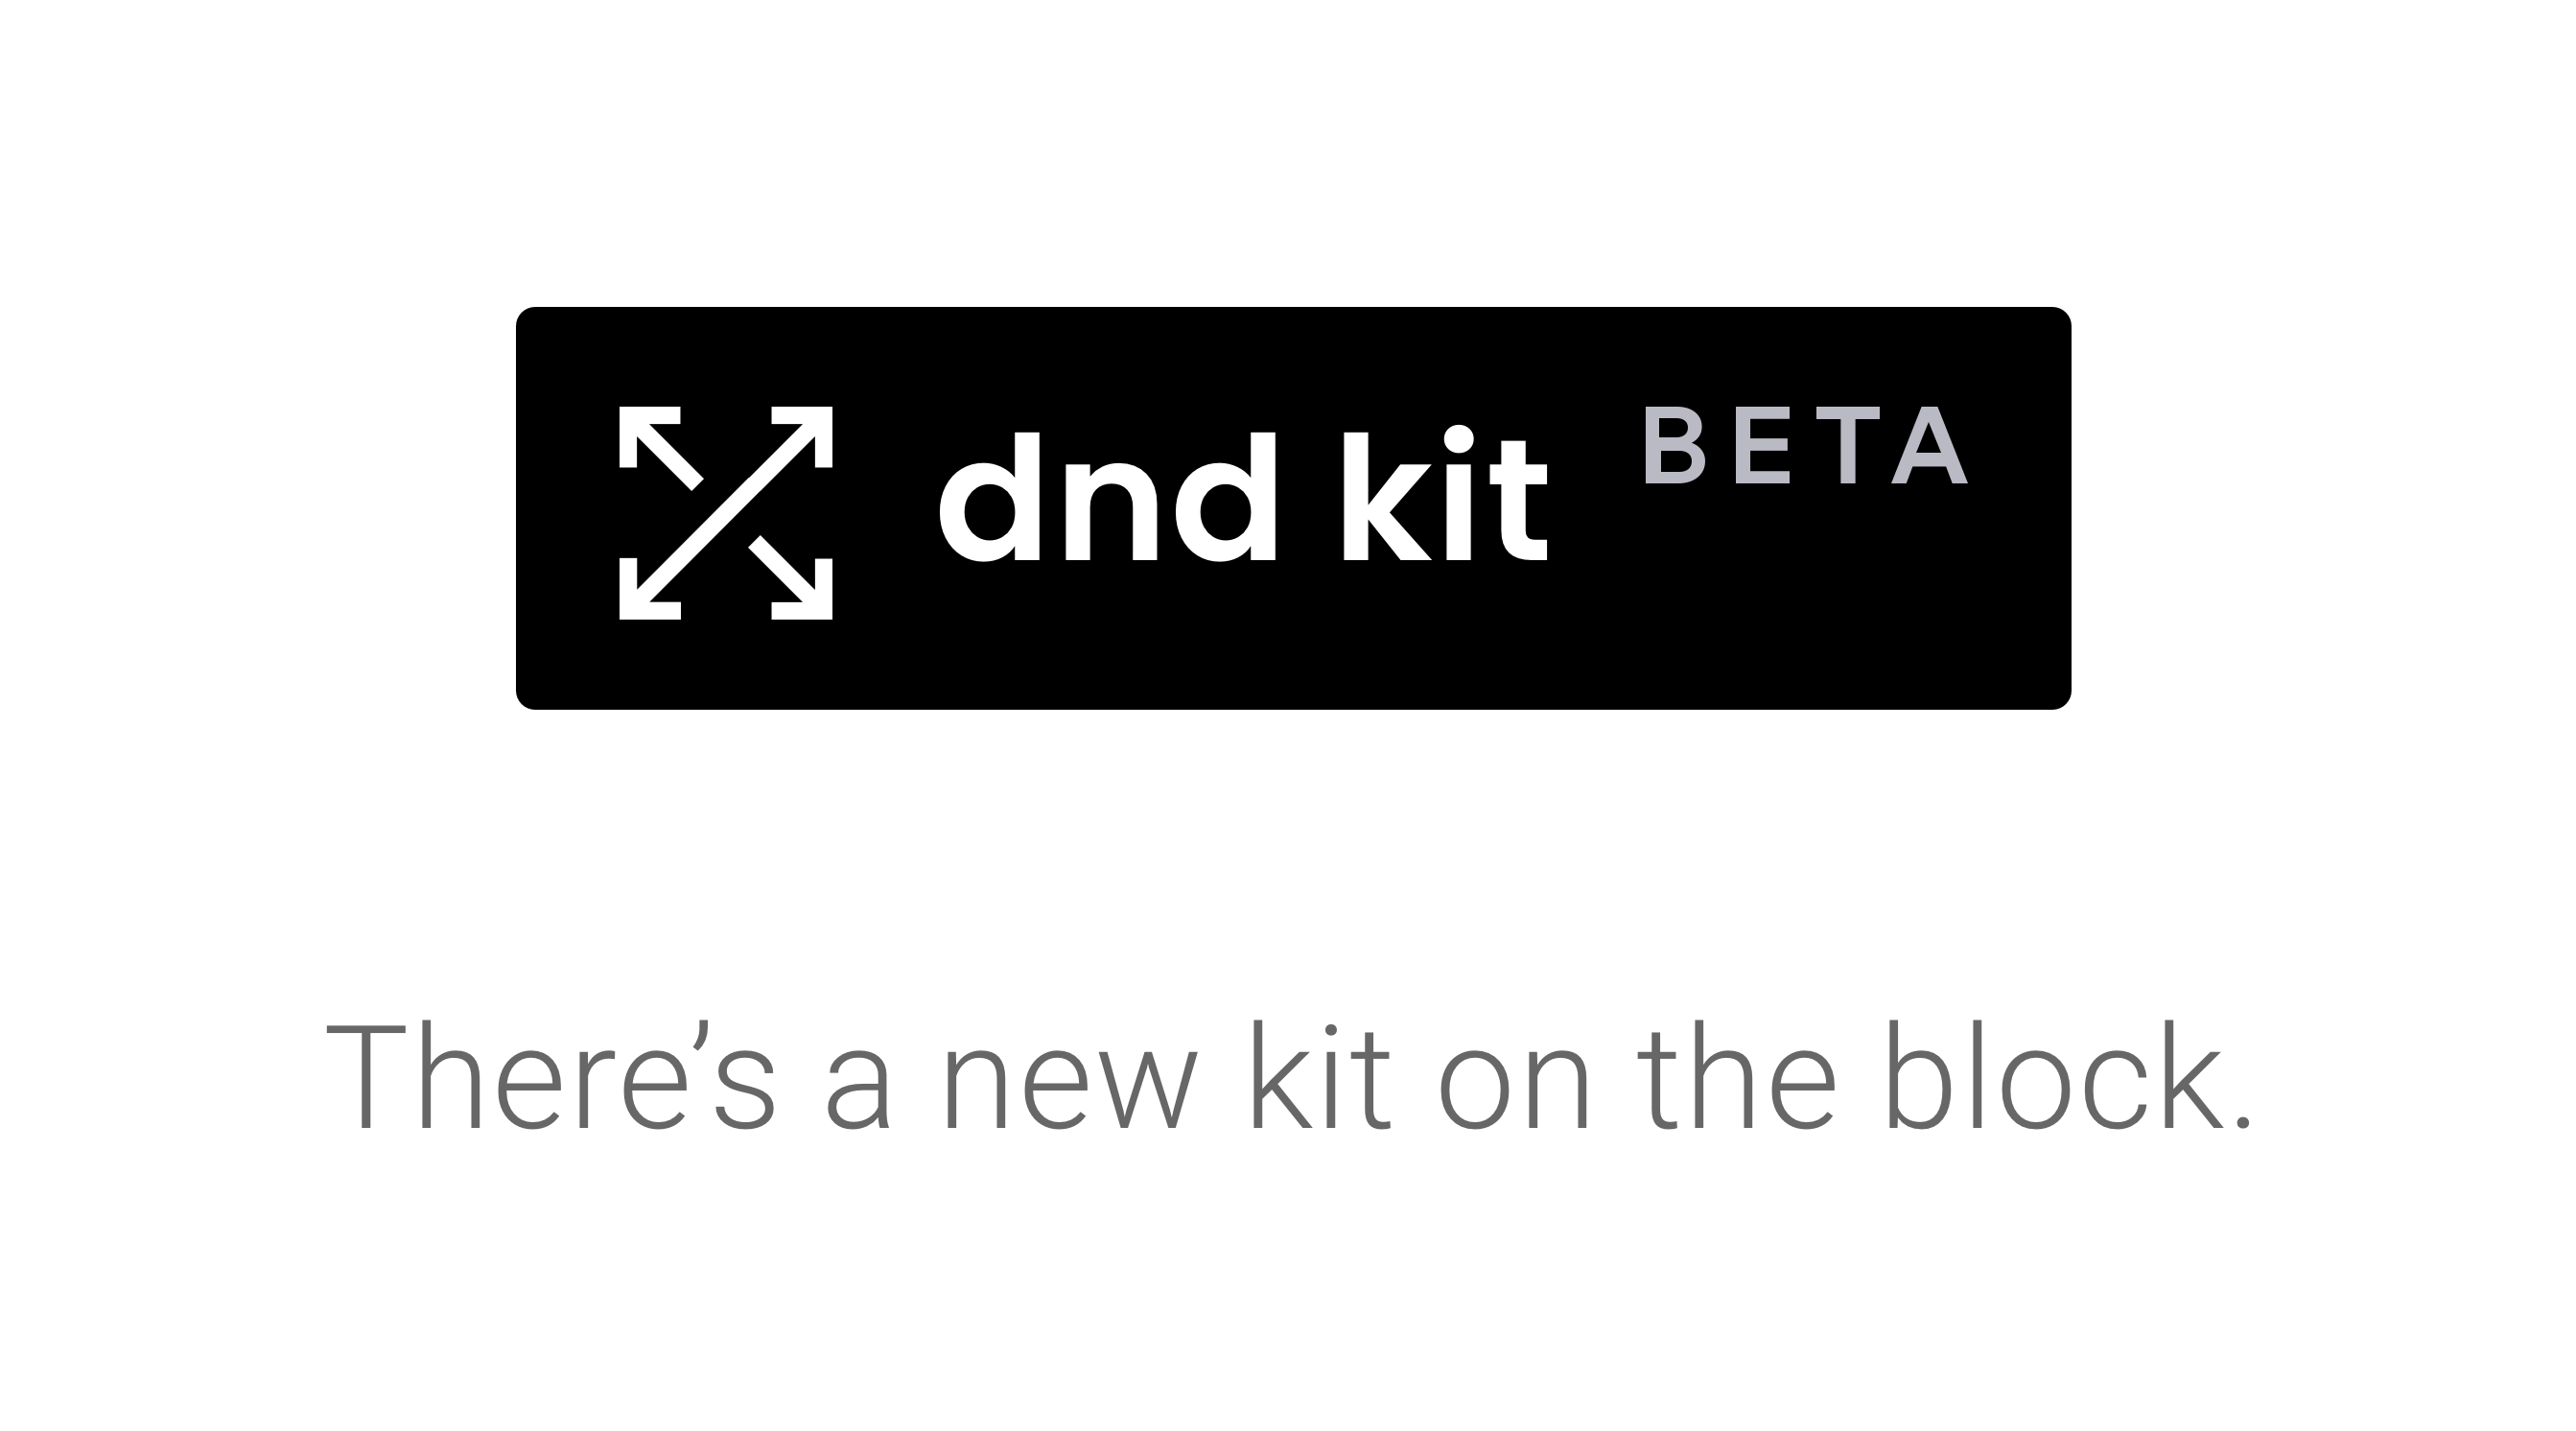 dnd kit – There's a new kit on the block.